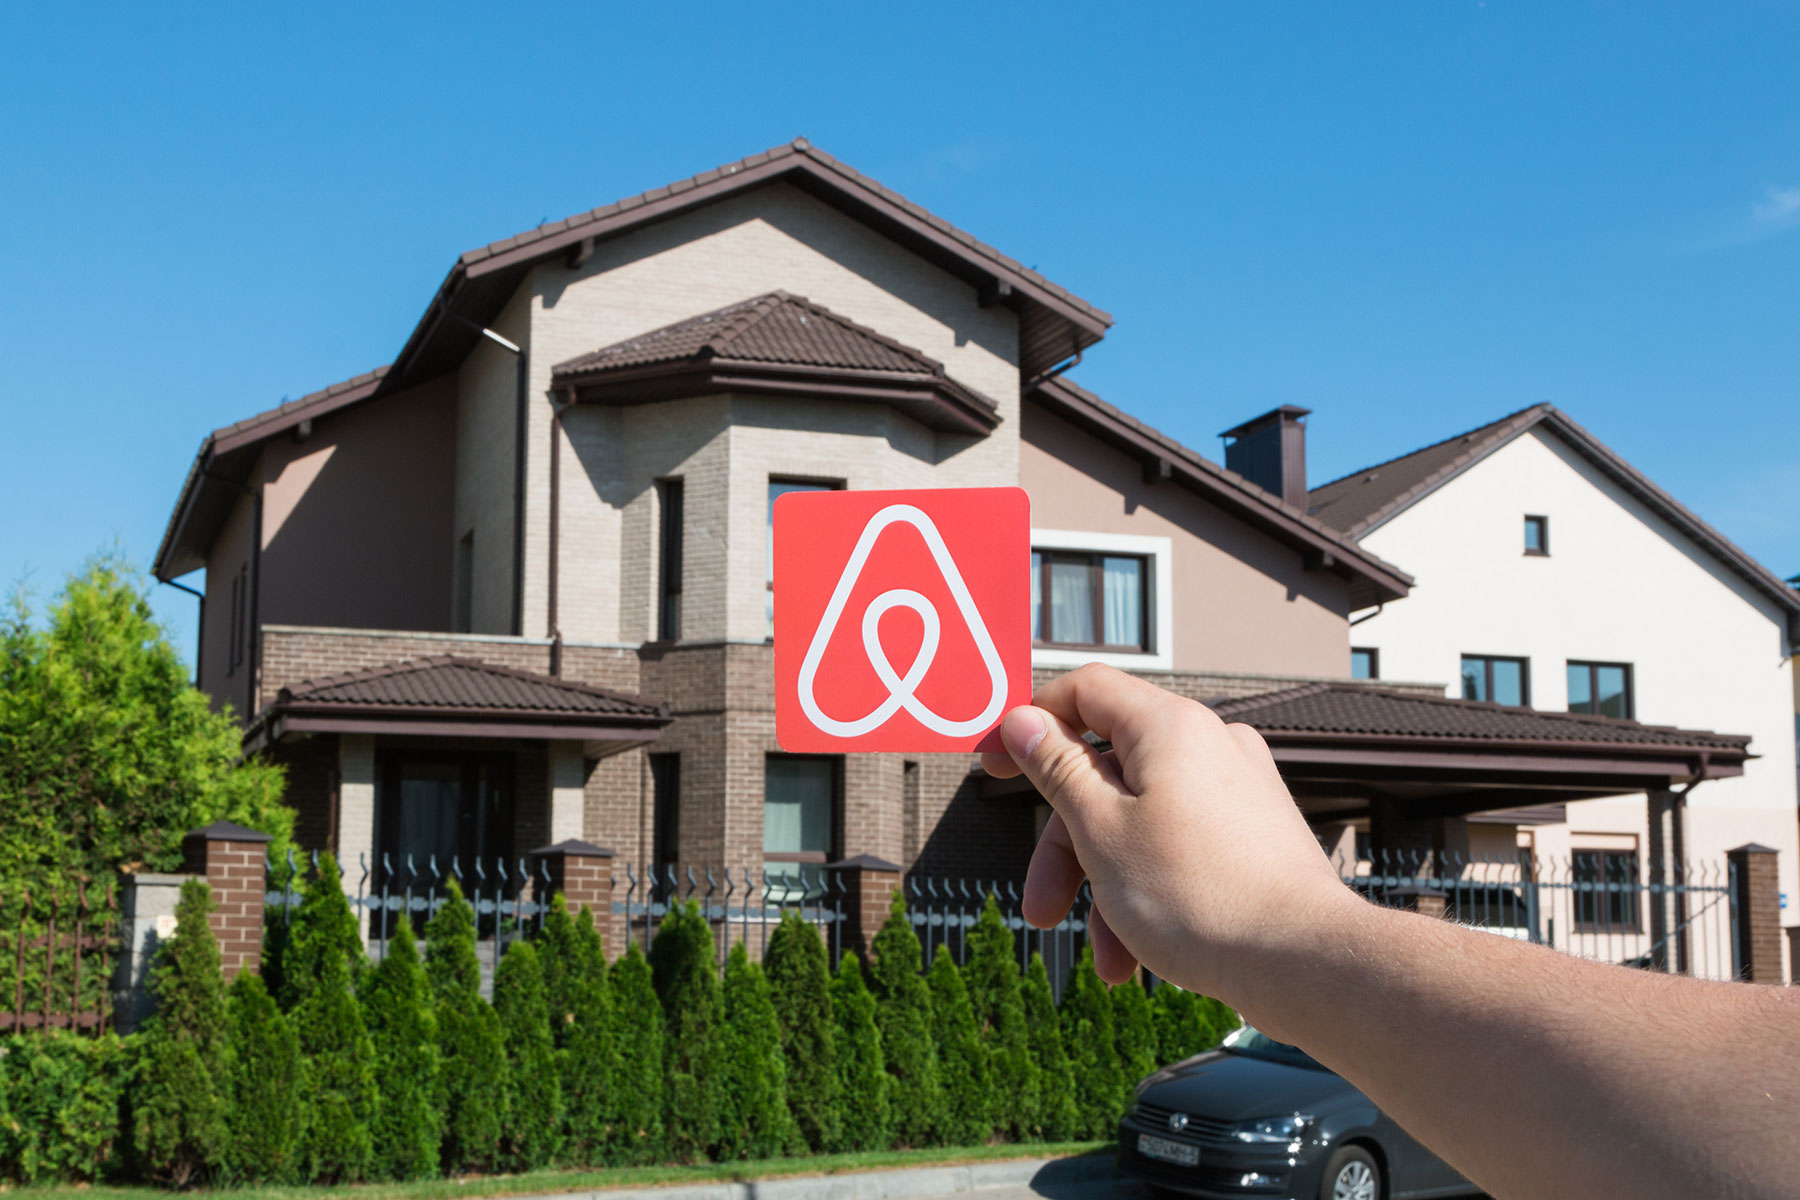 4 Tips To Make You The Best Airbnb Host